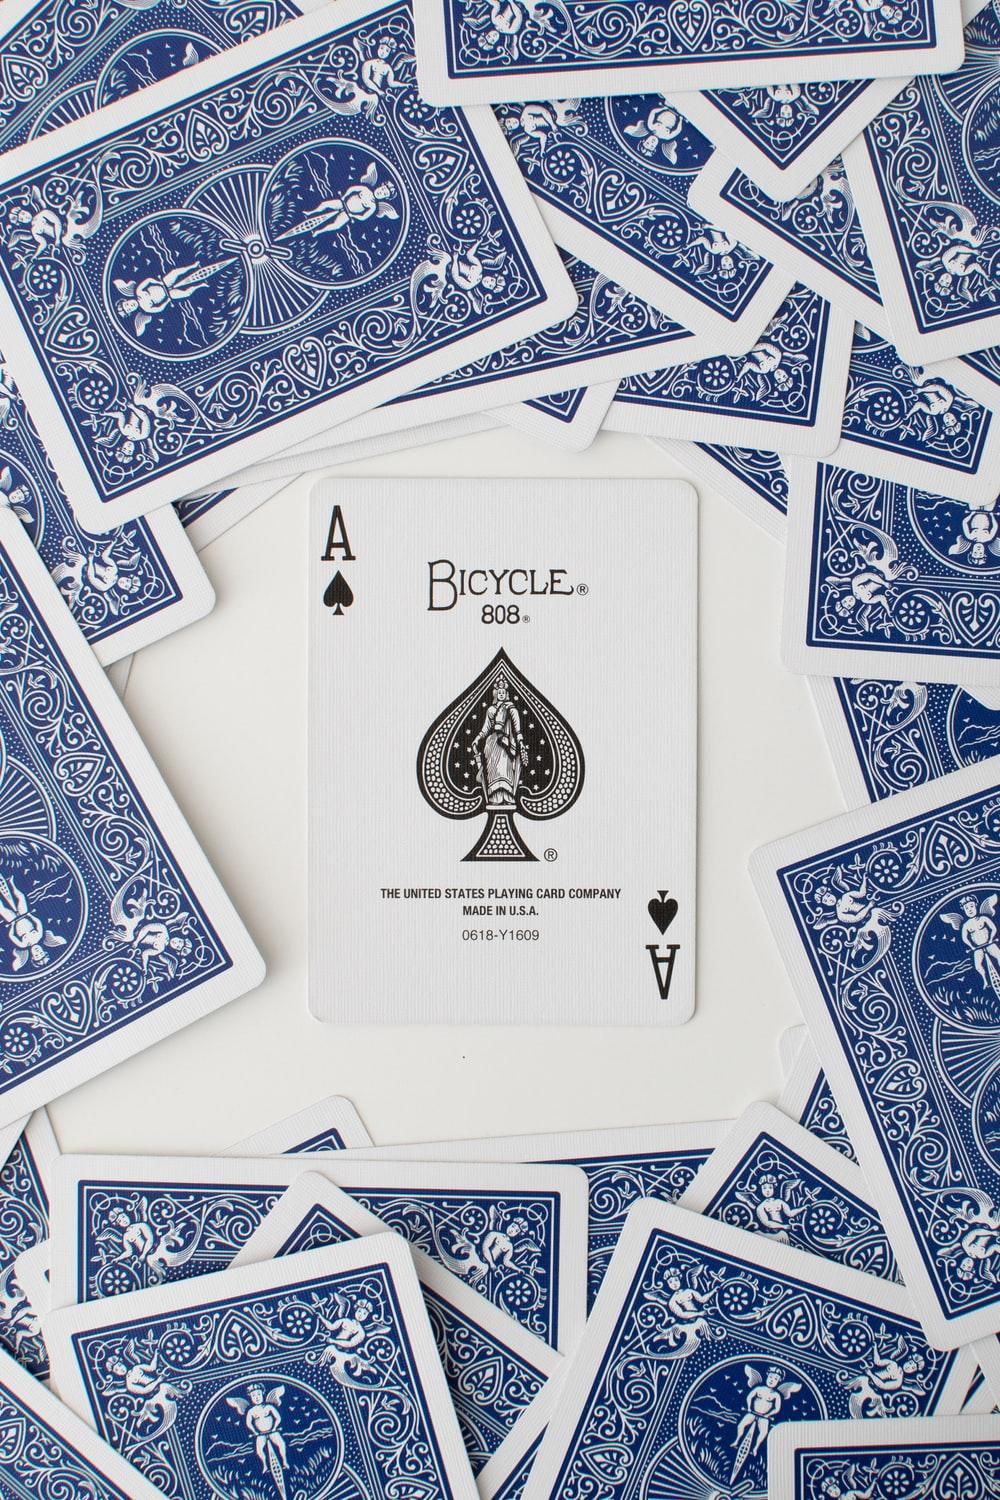 Ace Of Spade Picture. Download Free Image